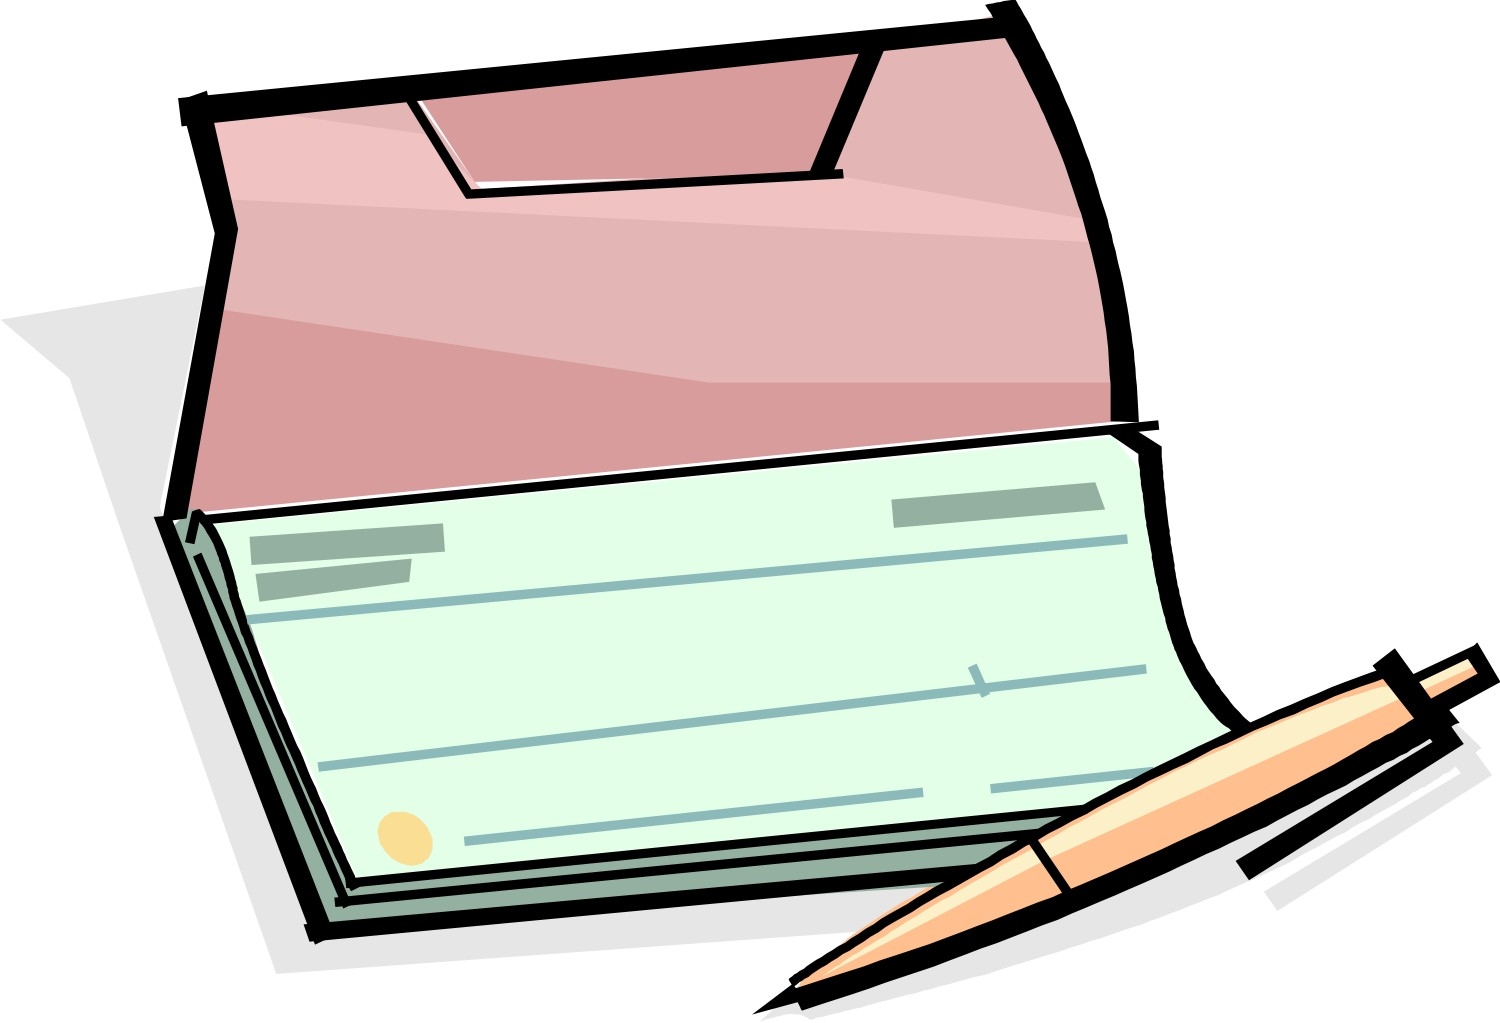 blank check clipart